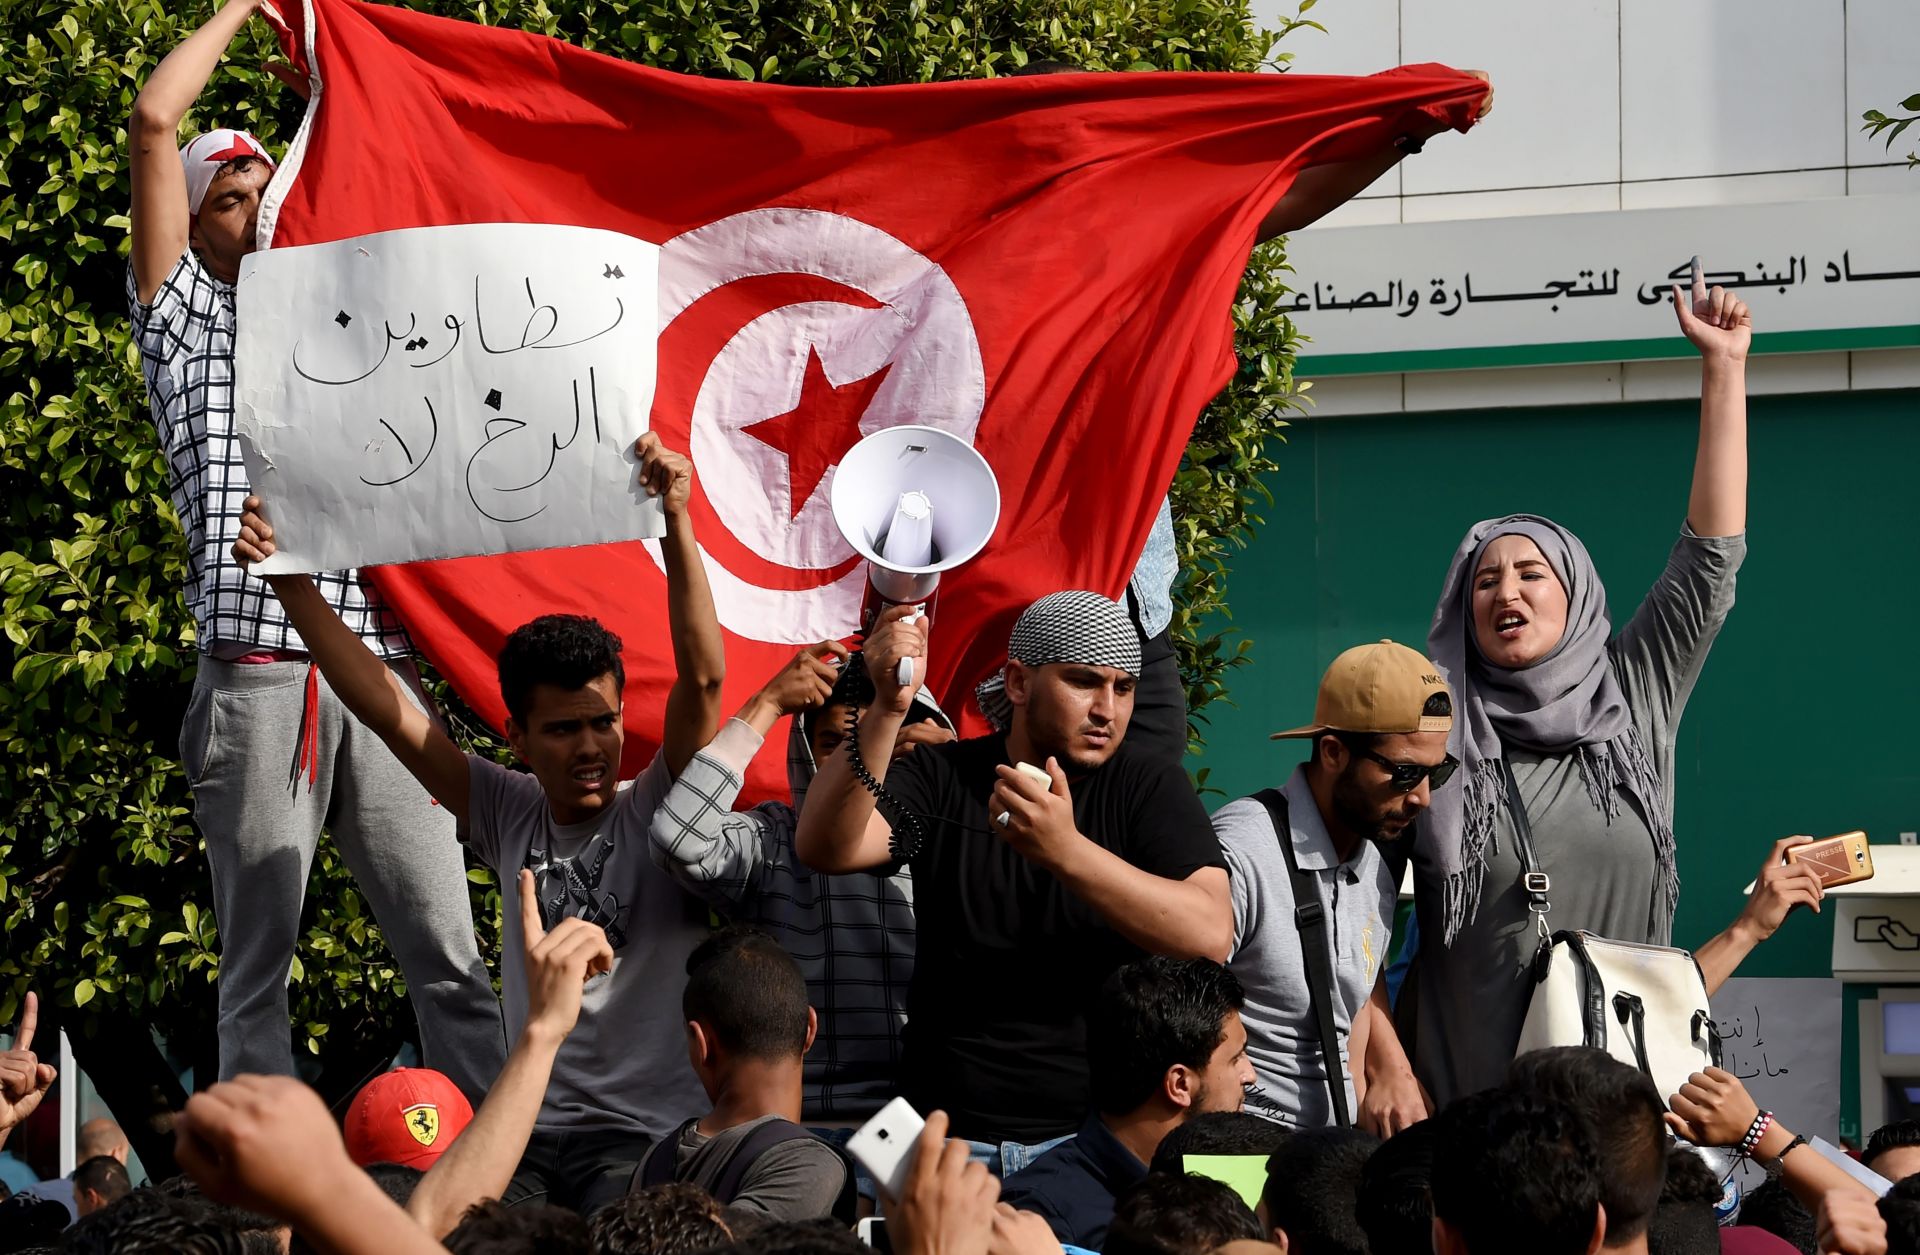 Protesters turned out May 22 in Tunis to show their support for Tunisians who held a three-month sit-in in Tataouine province demanding jobs and a share of oil and natural gas revenues for their impoverished region.